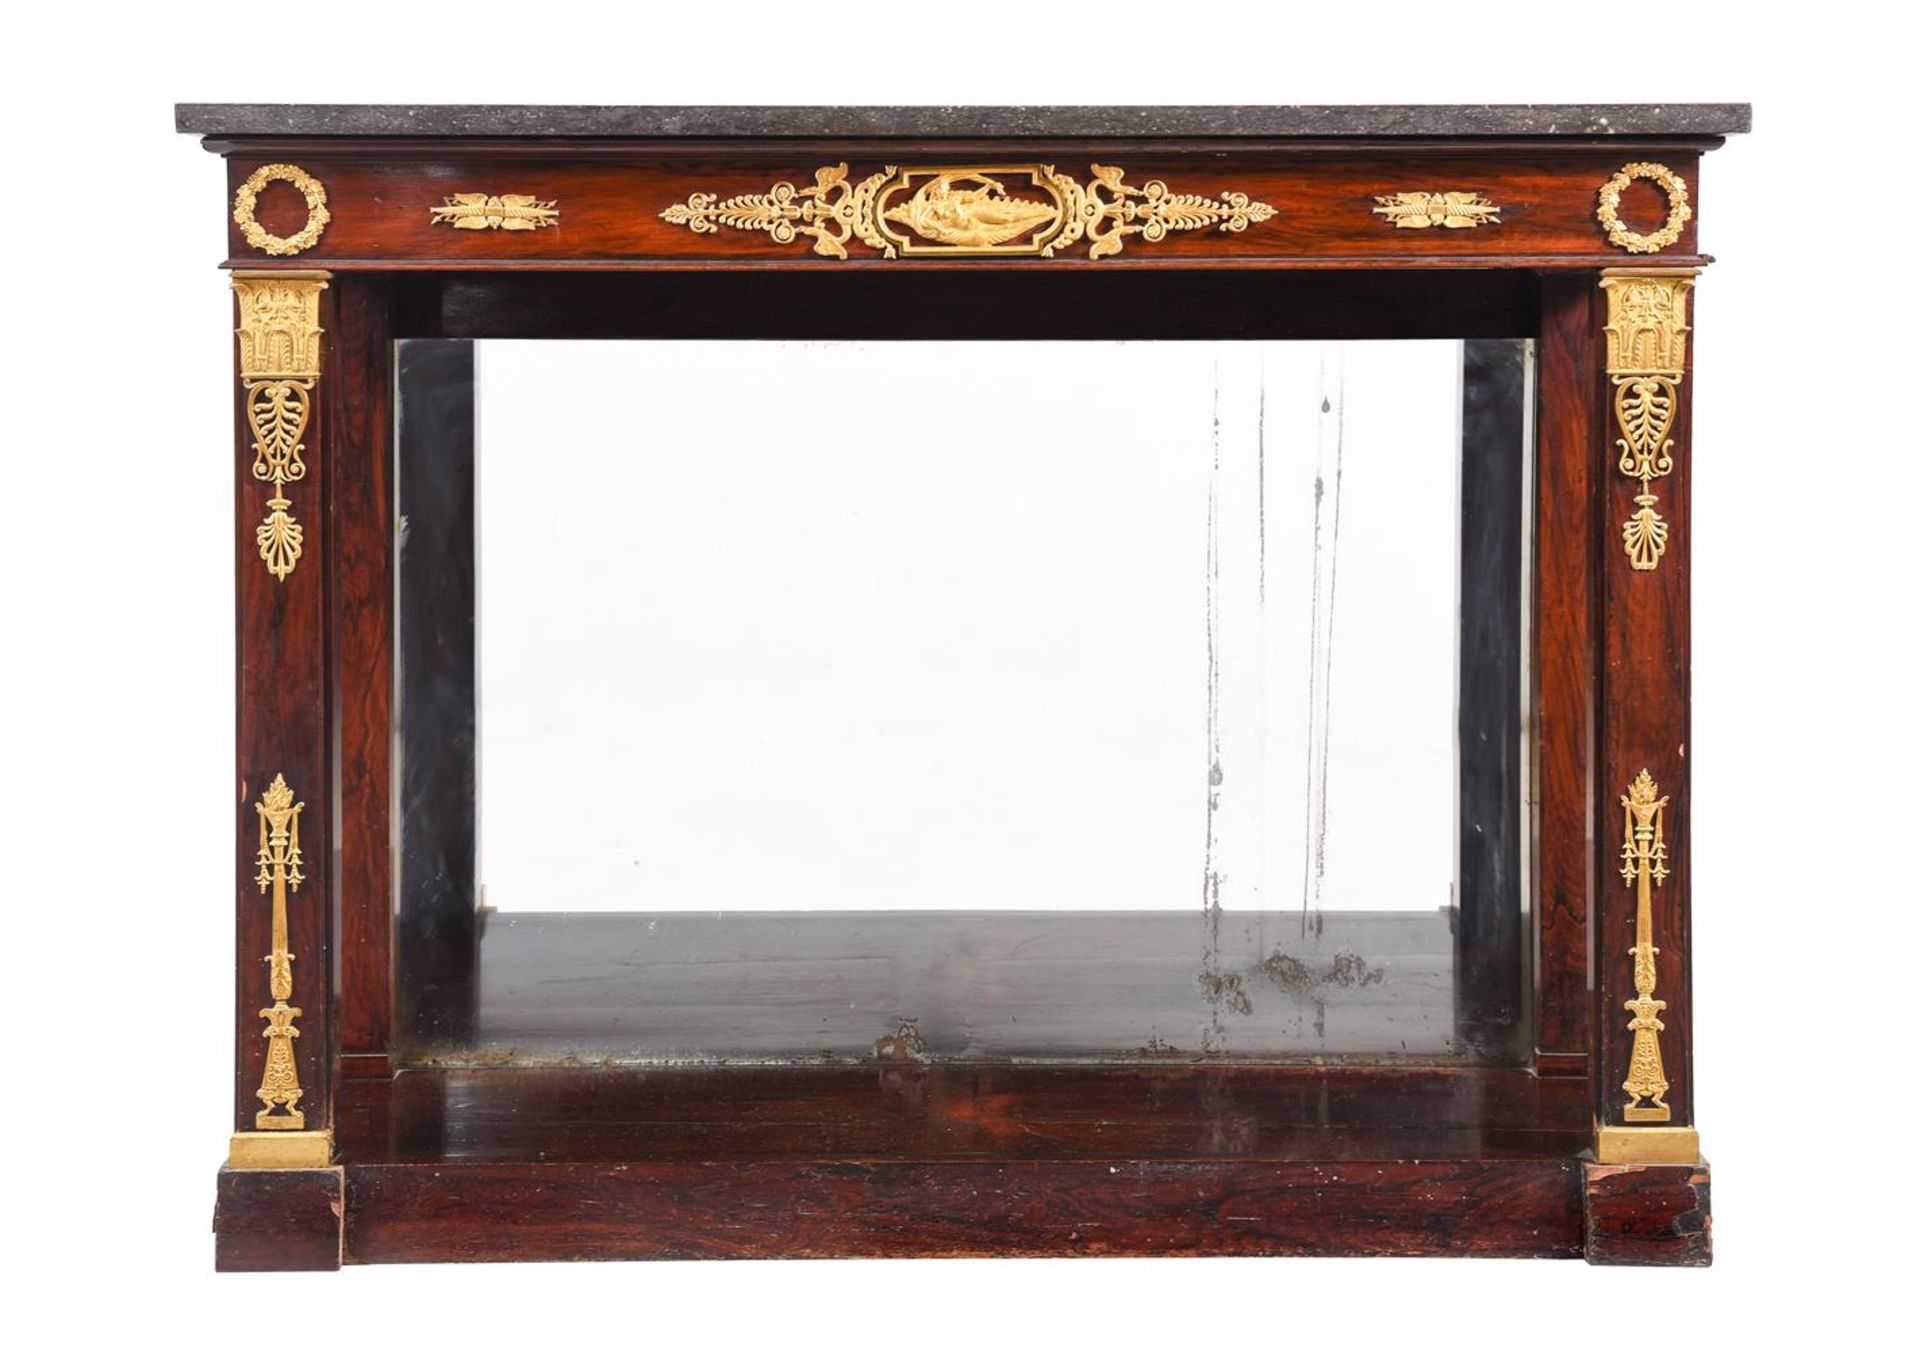 A MAHOGANY AND ORMOLU MOUNTED CONSOLE TABLEIN EMPIRE STYLE